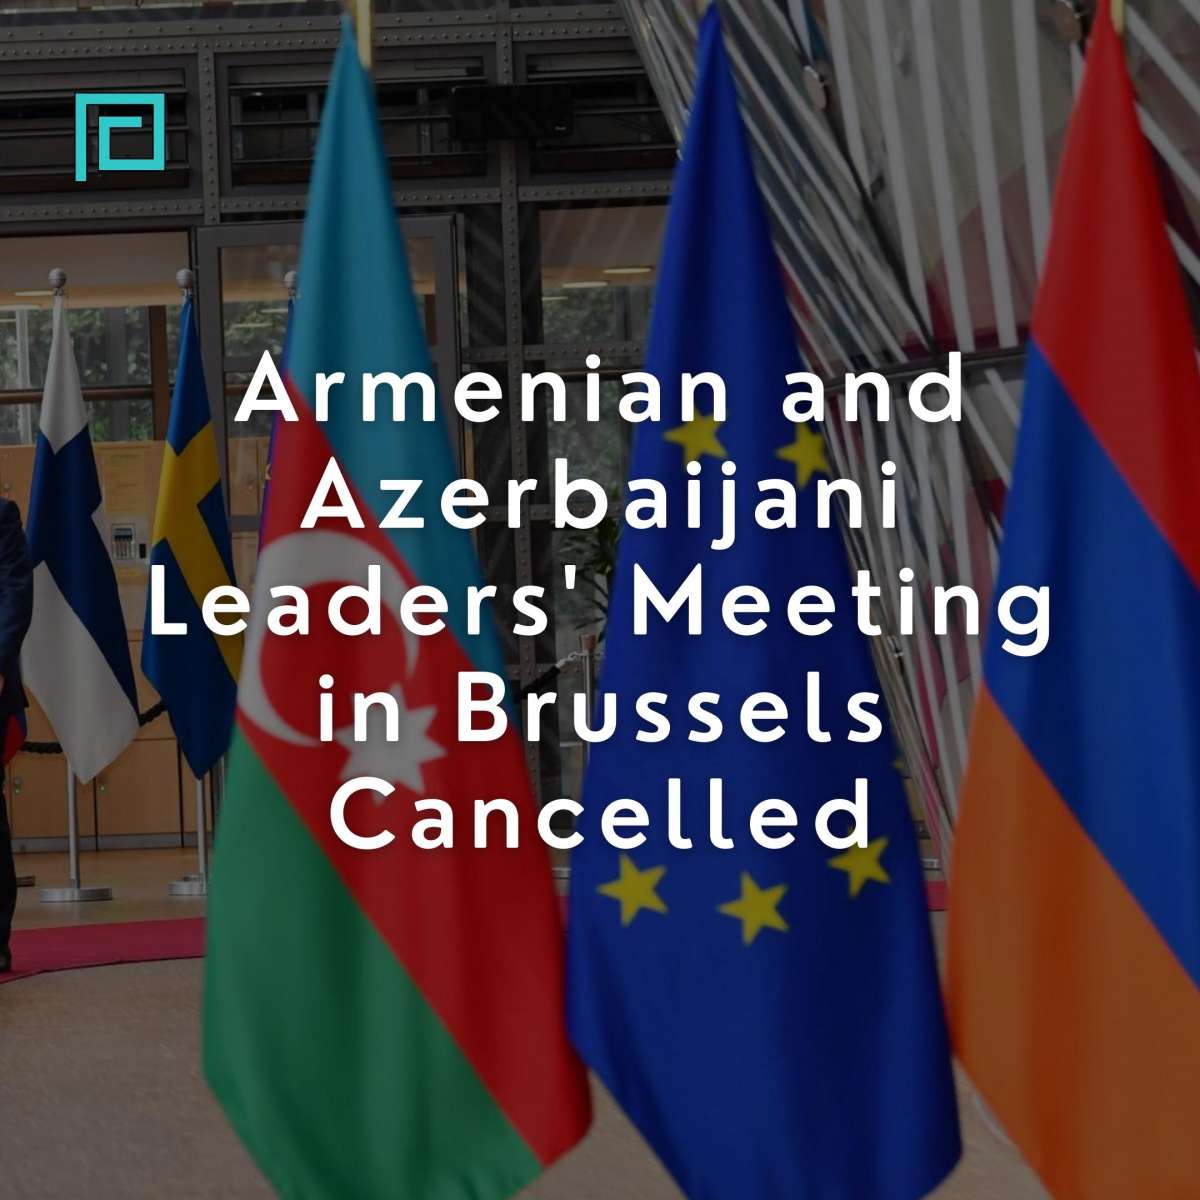 Armenian and Azerbaijani Leaders' Meeting in Brussels Cancelled